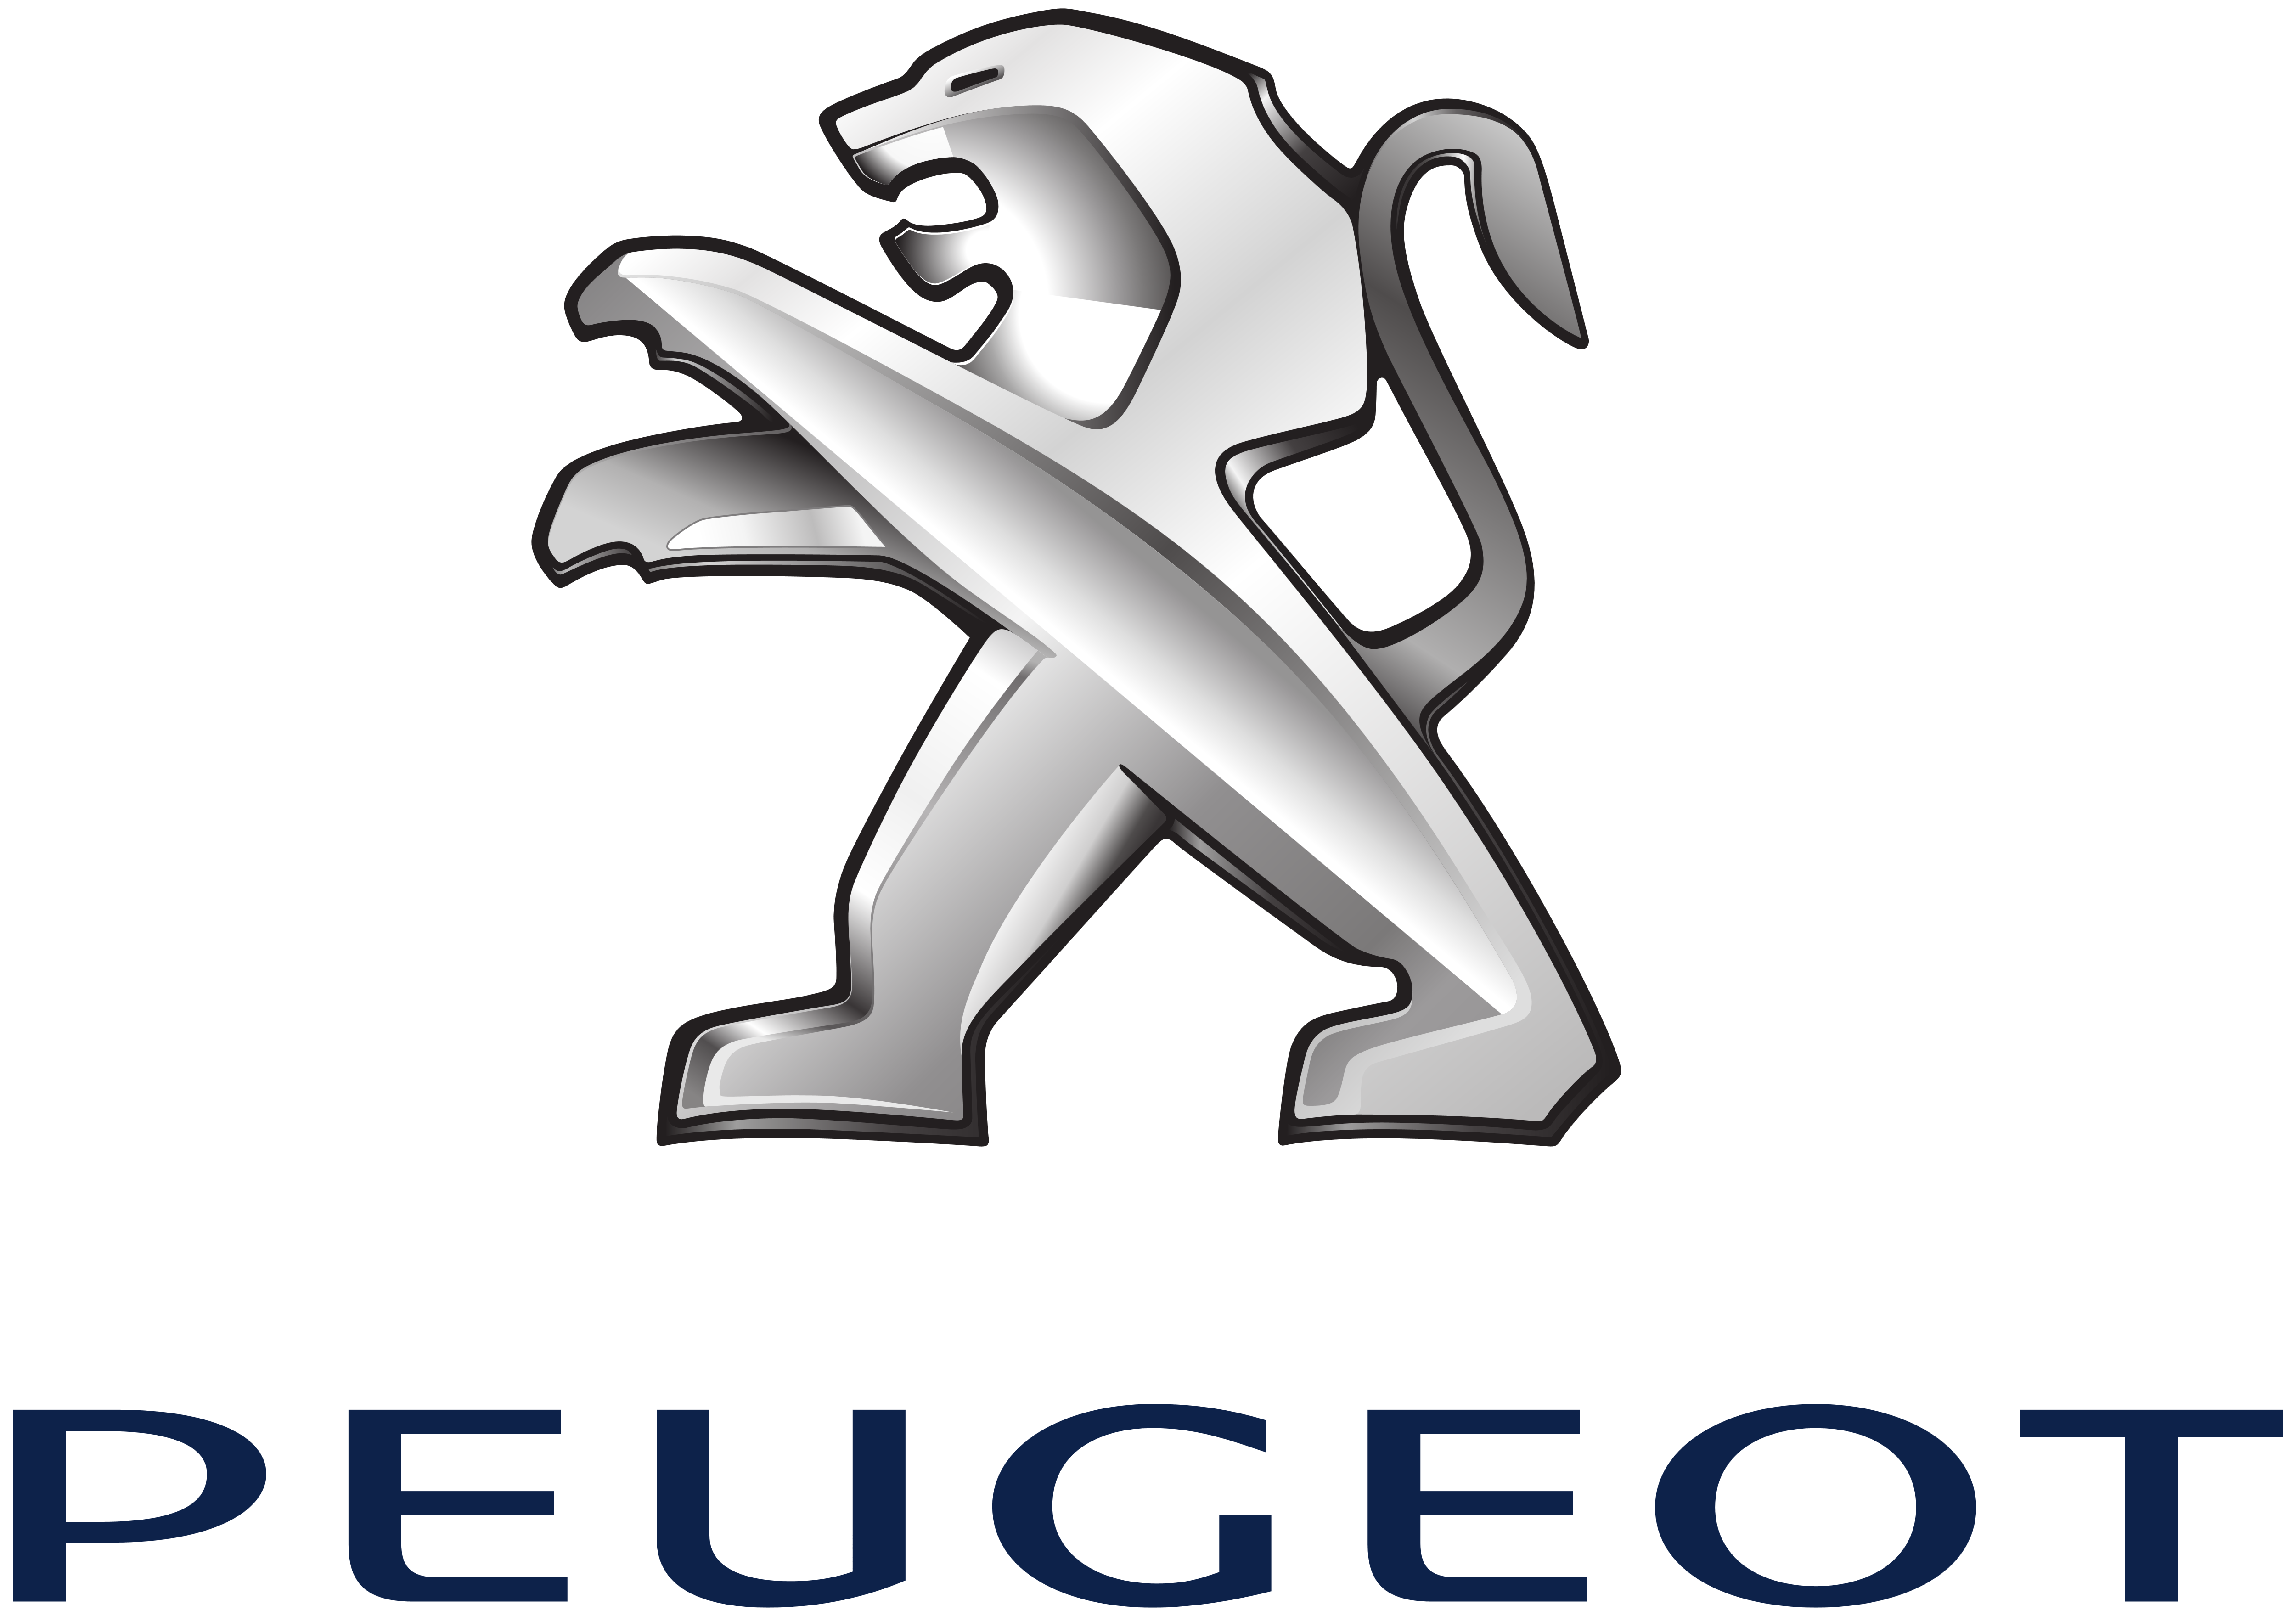 Peugeot Logo, Hd Png, Meaning